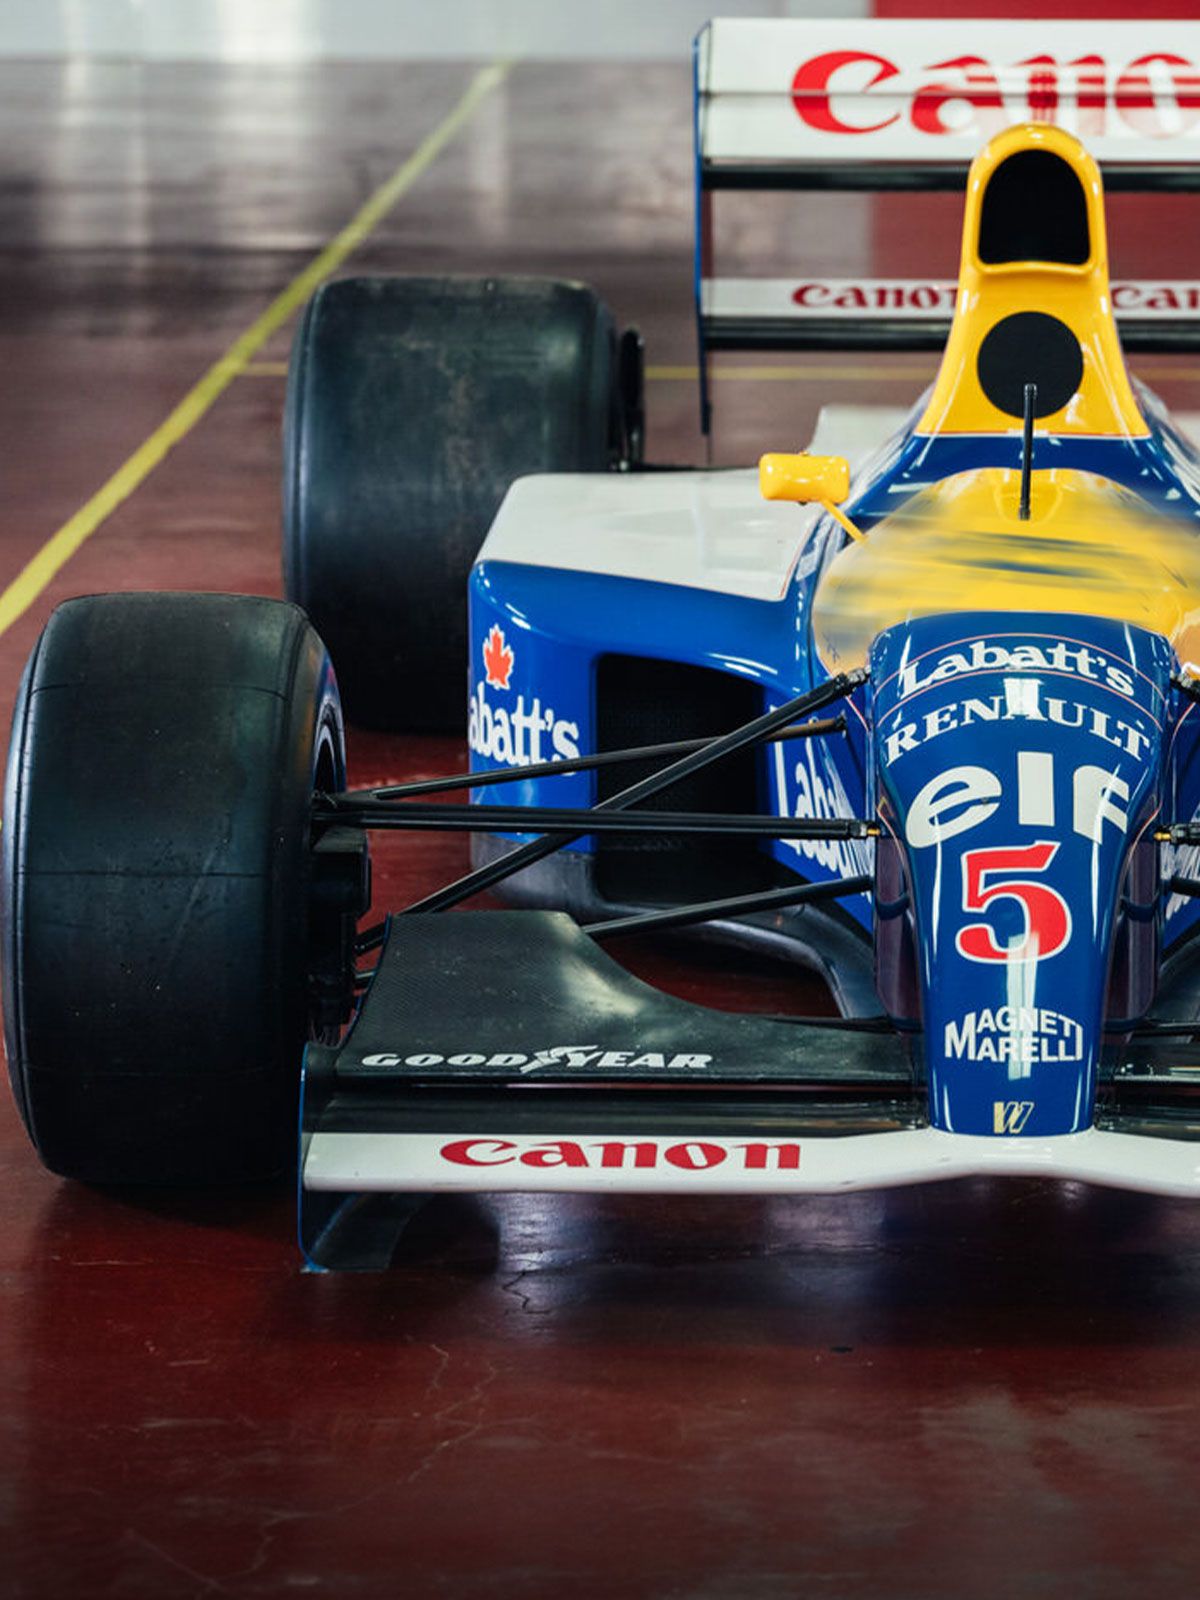 F1® Race Cars For Sale F1 Authentics